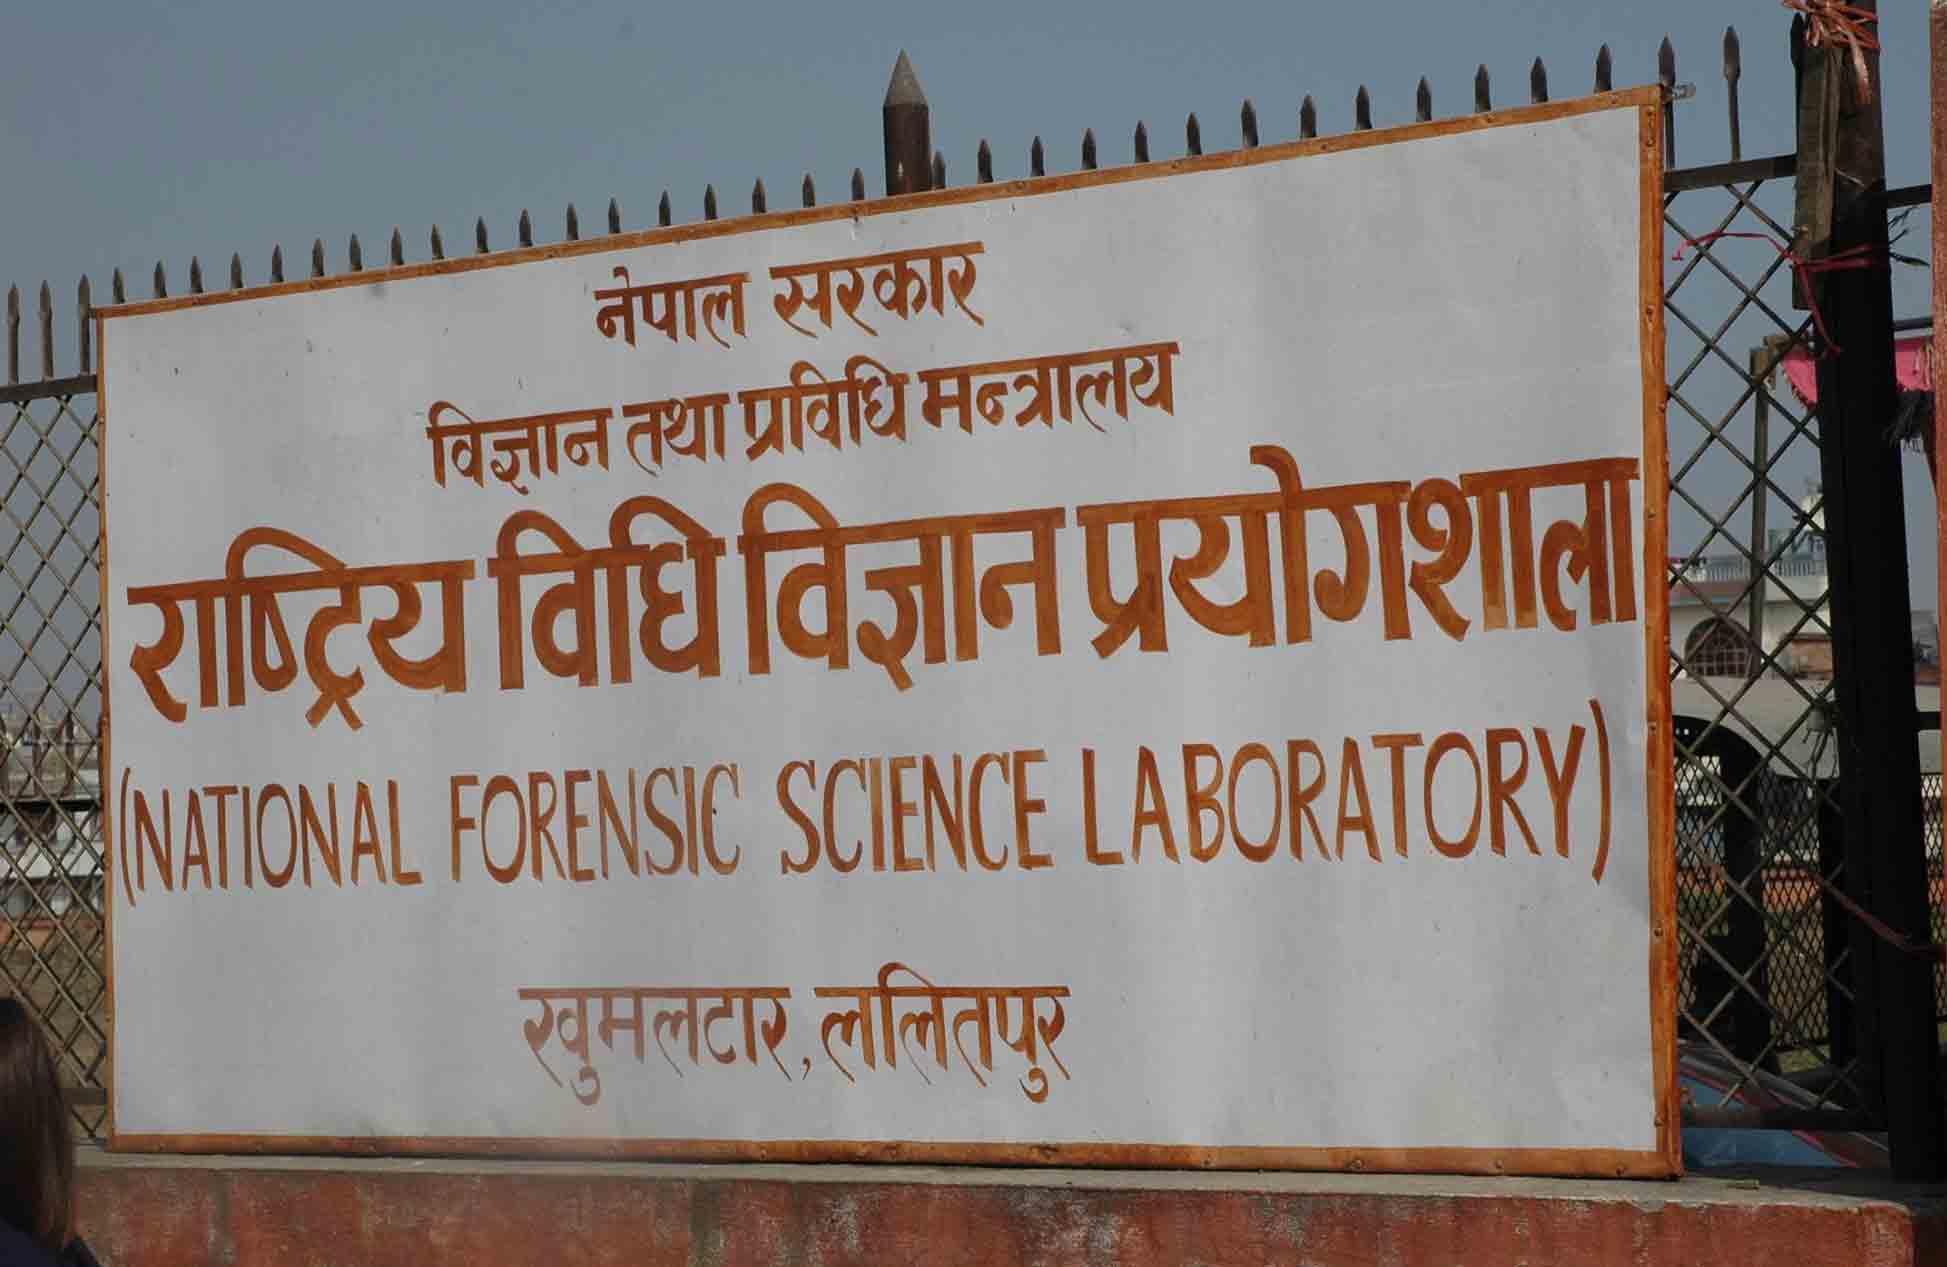 National Forensic Science Laboratory Notice